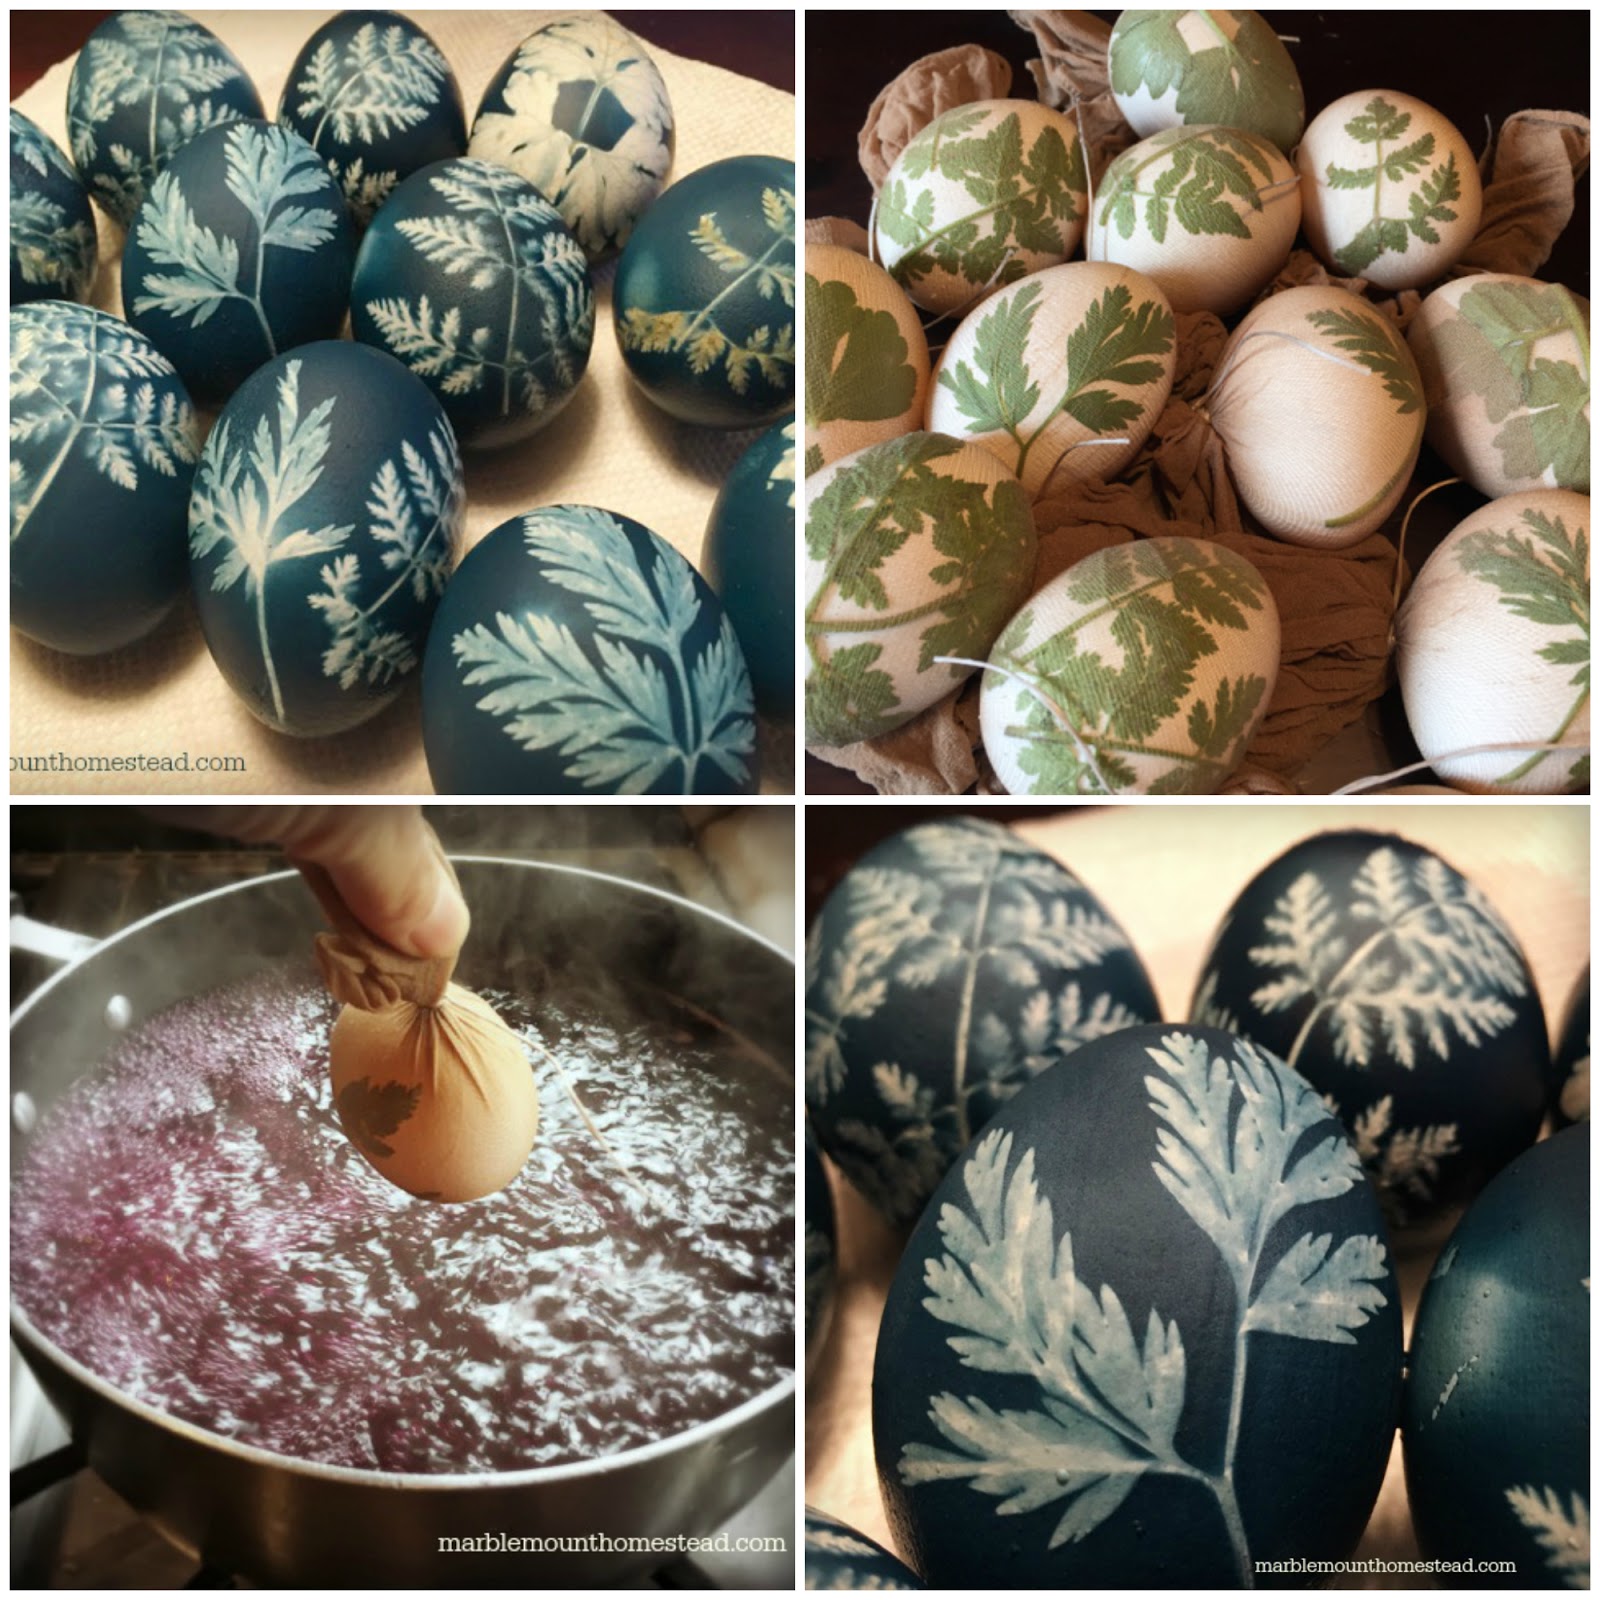 Marblemount Homestead: Last minute Easter Eggs that are stunning and  colored naturally - how to dye eggs with red cabbage and a leaf pattern